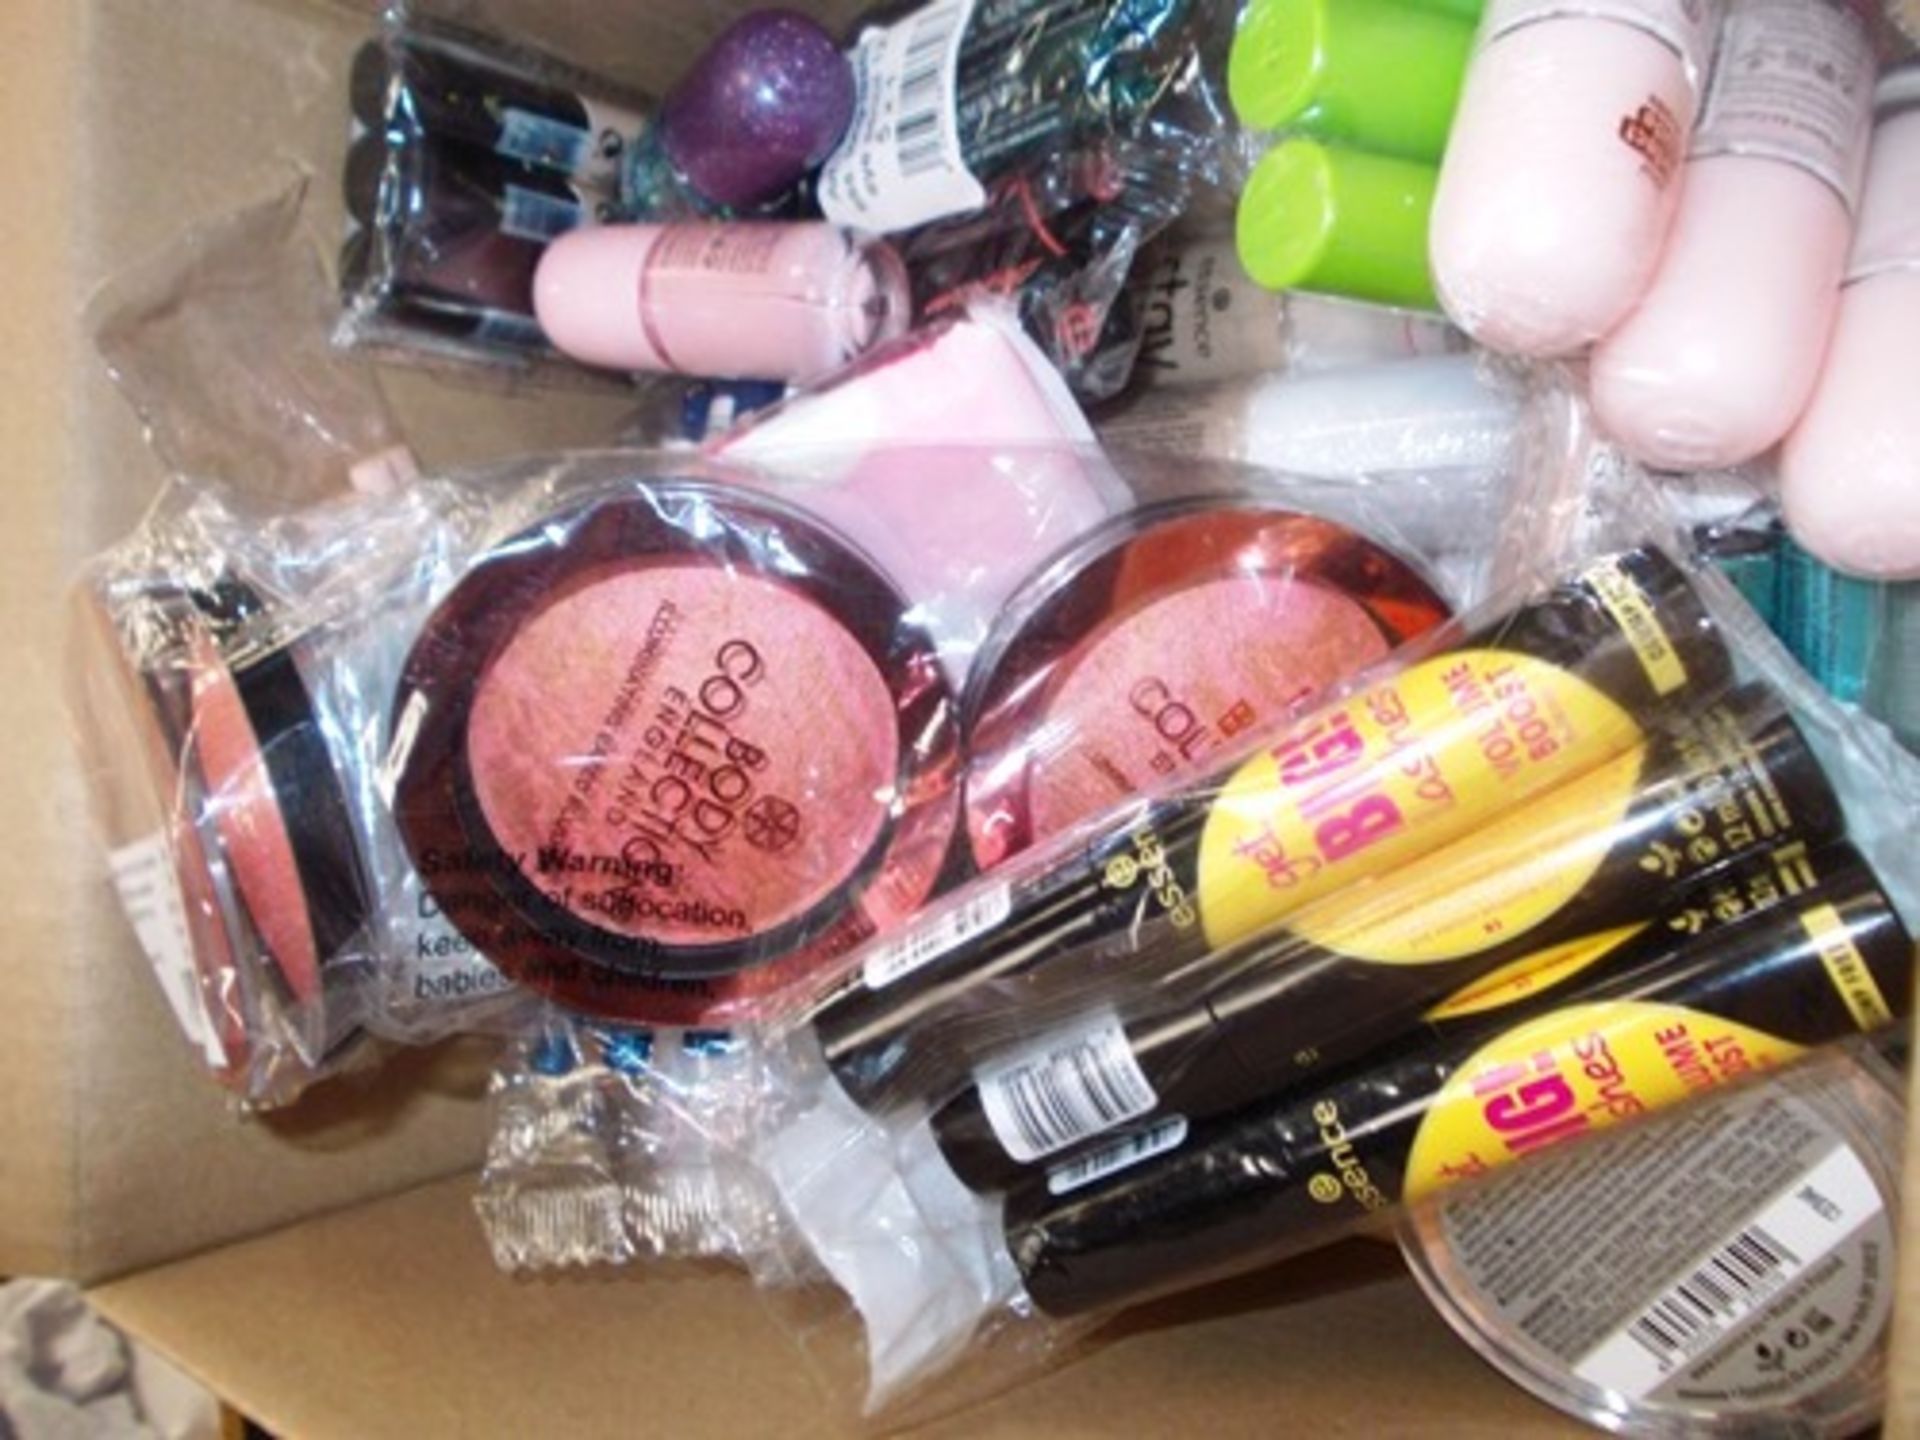 100 x various Essence Cosmetics including mascara, lipstick, foundation etc. - Sealed new in pack ( - Image 2 of 2